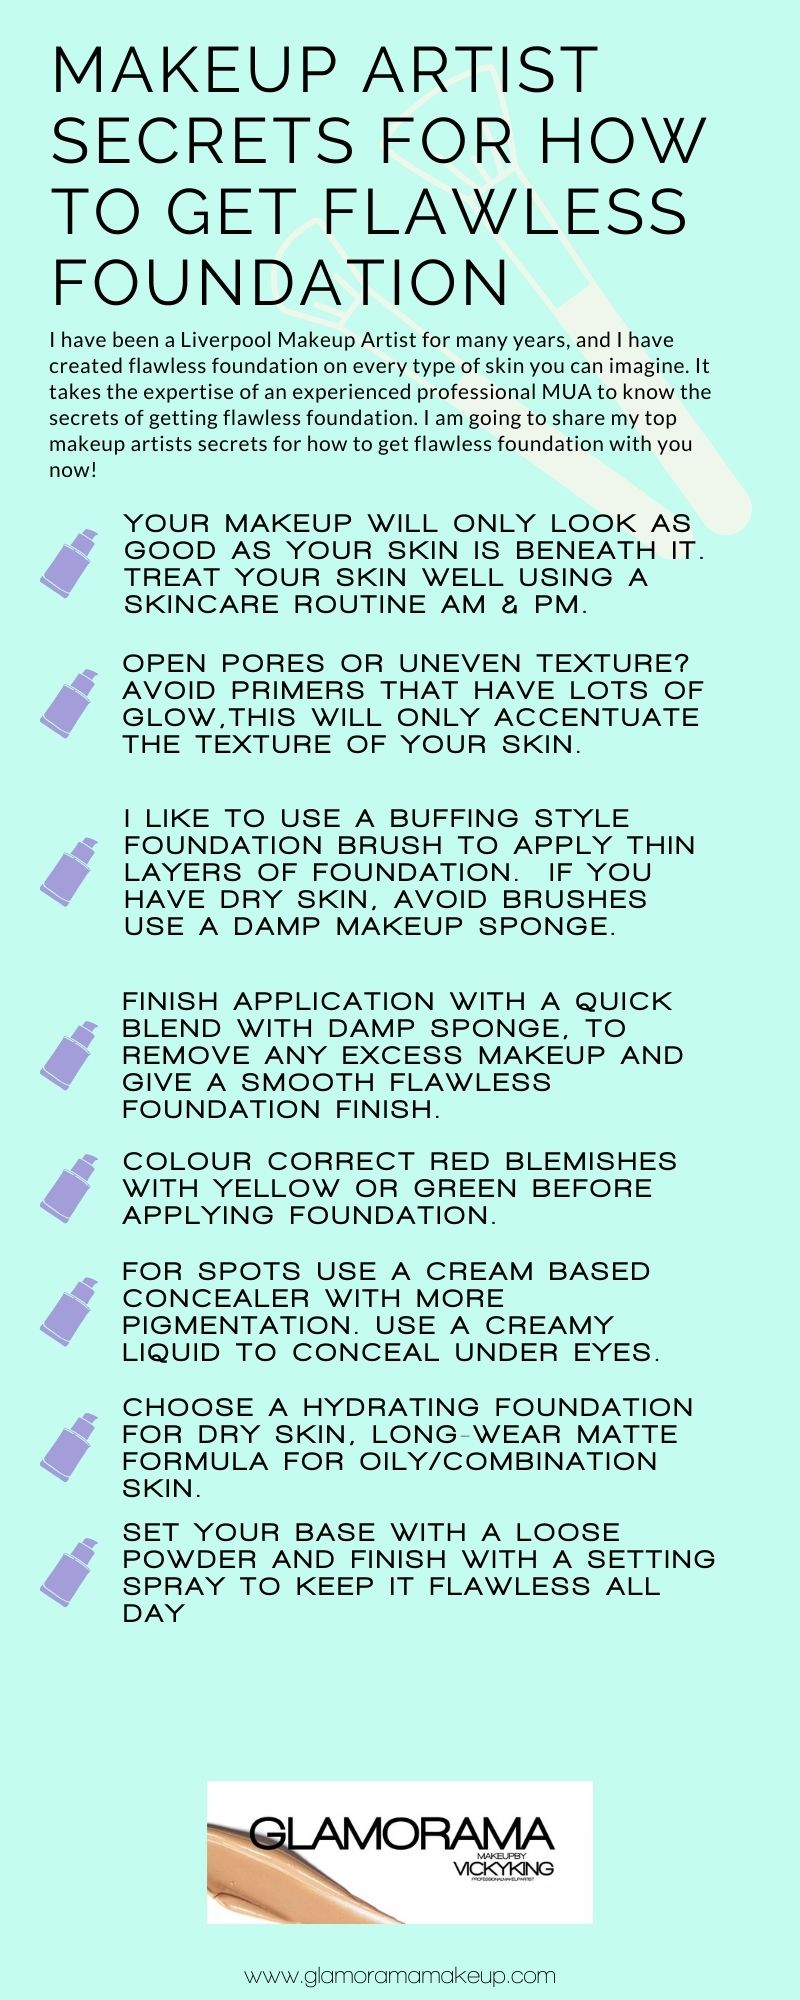 Makeup Artist Secrets for How to Get Flawless Foundation Infographic